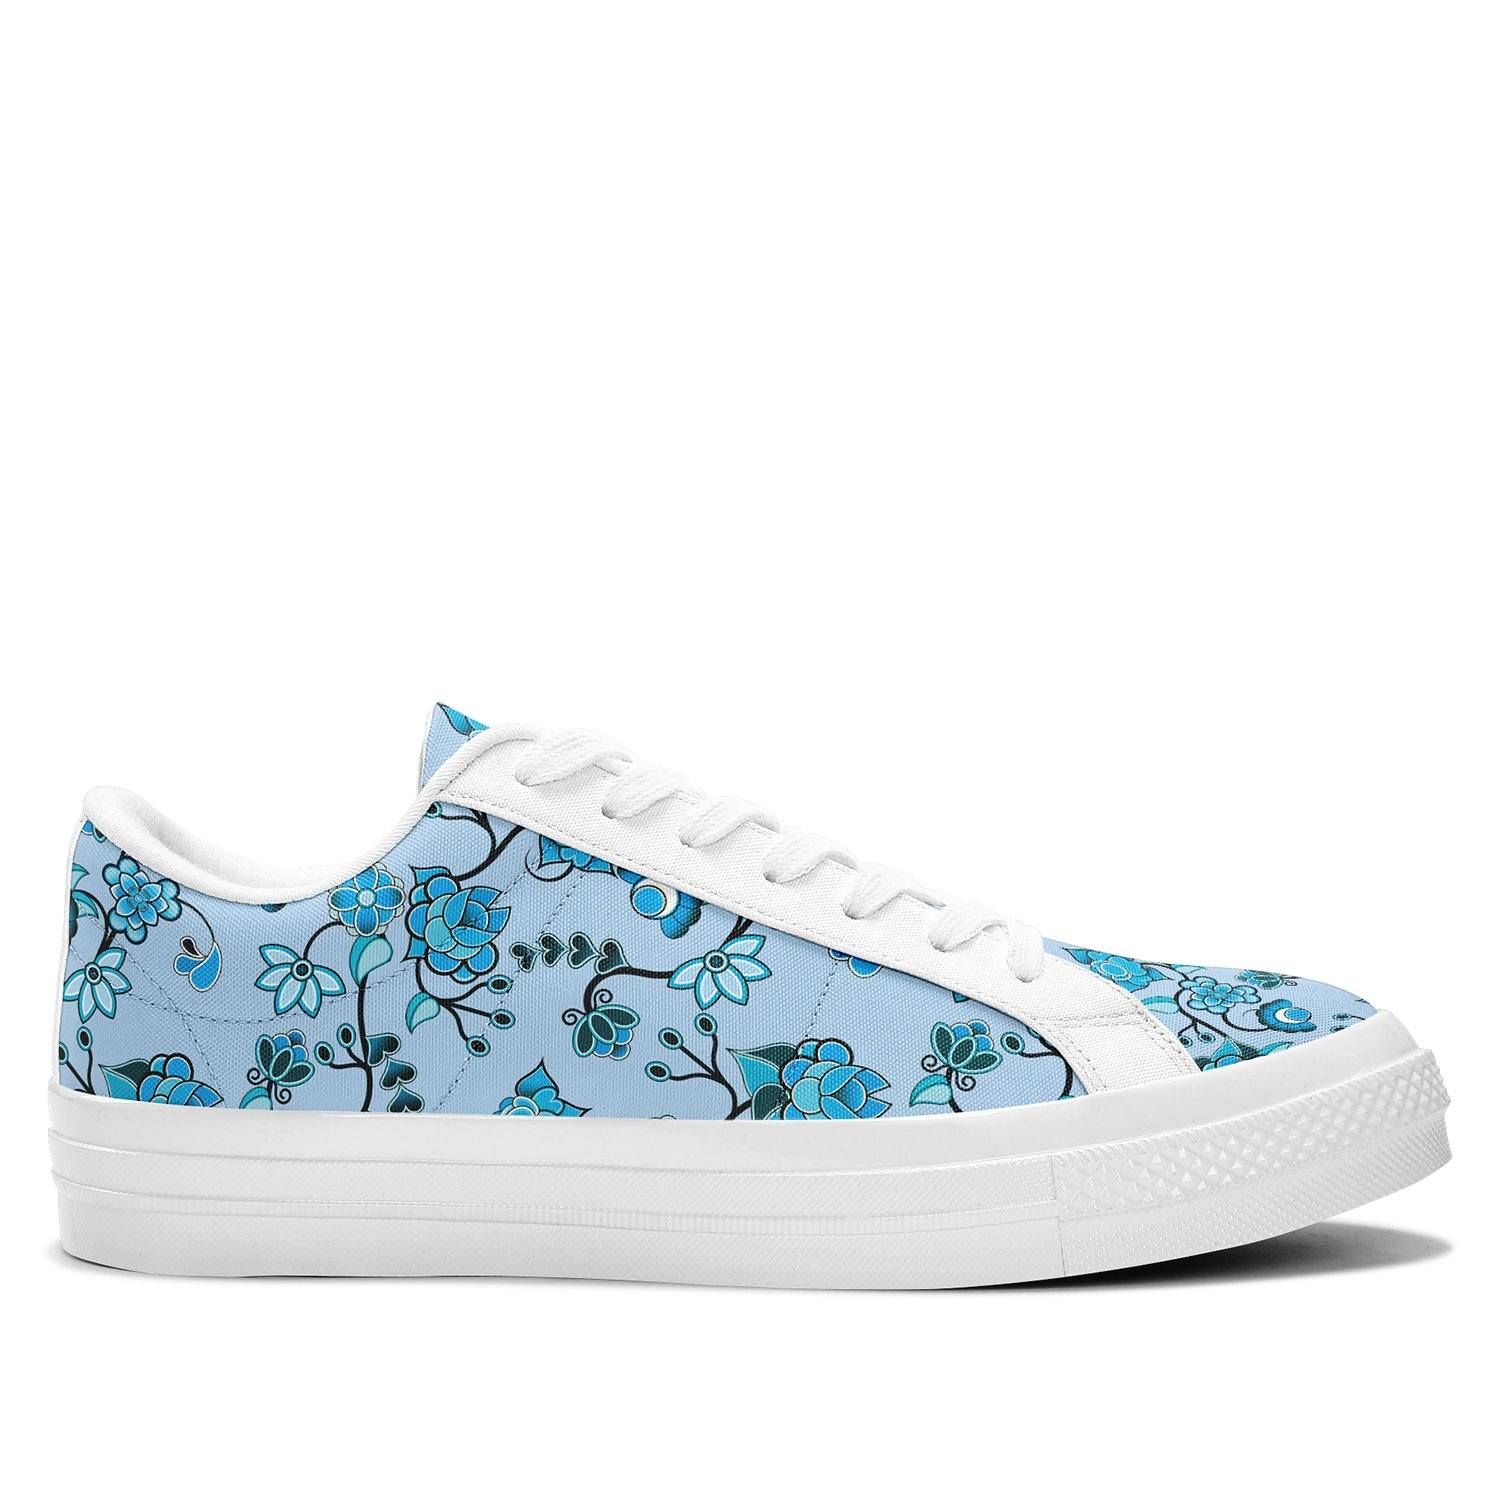 Blue Floral Amour Aapisi Low Top Canvas Shoes White Sole aapisi Herman 